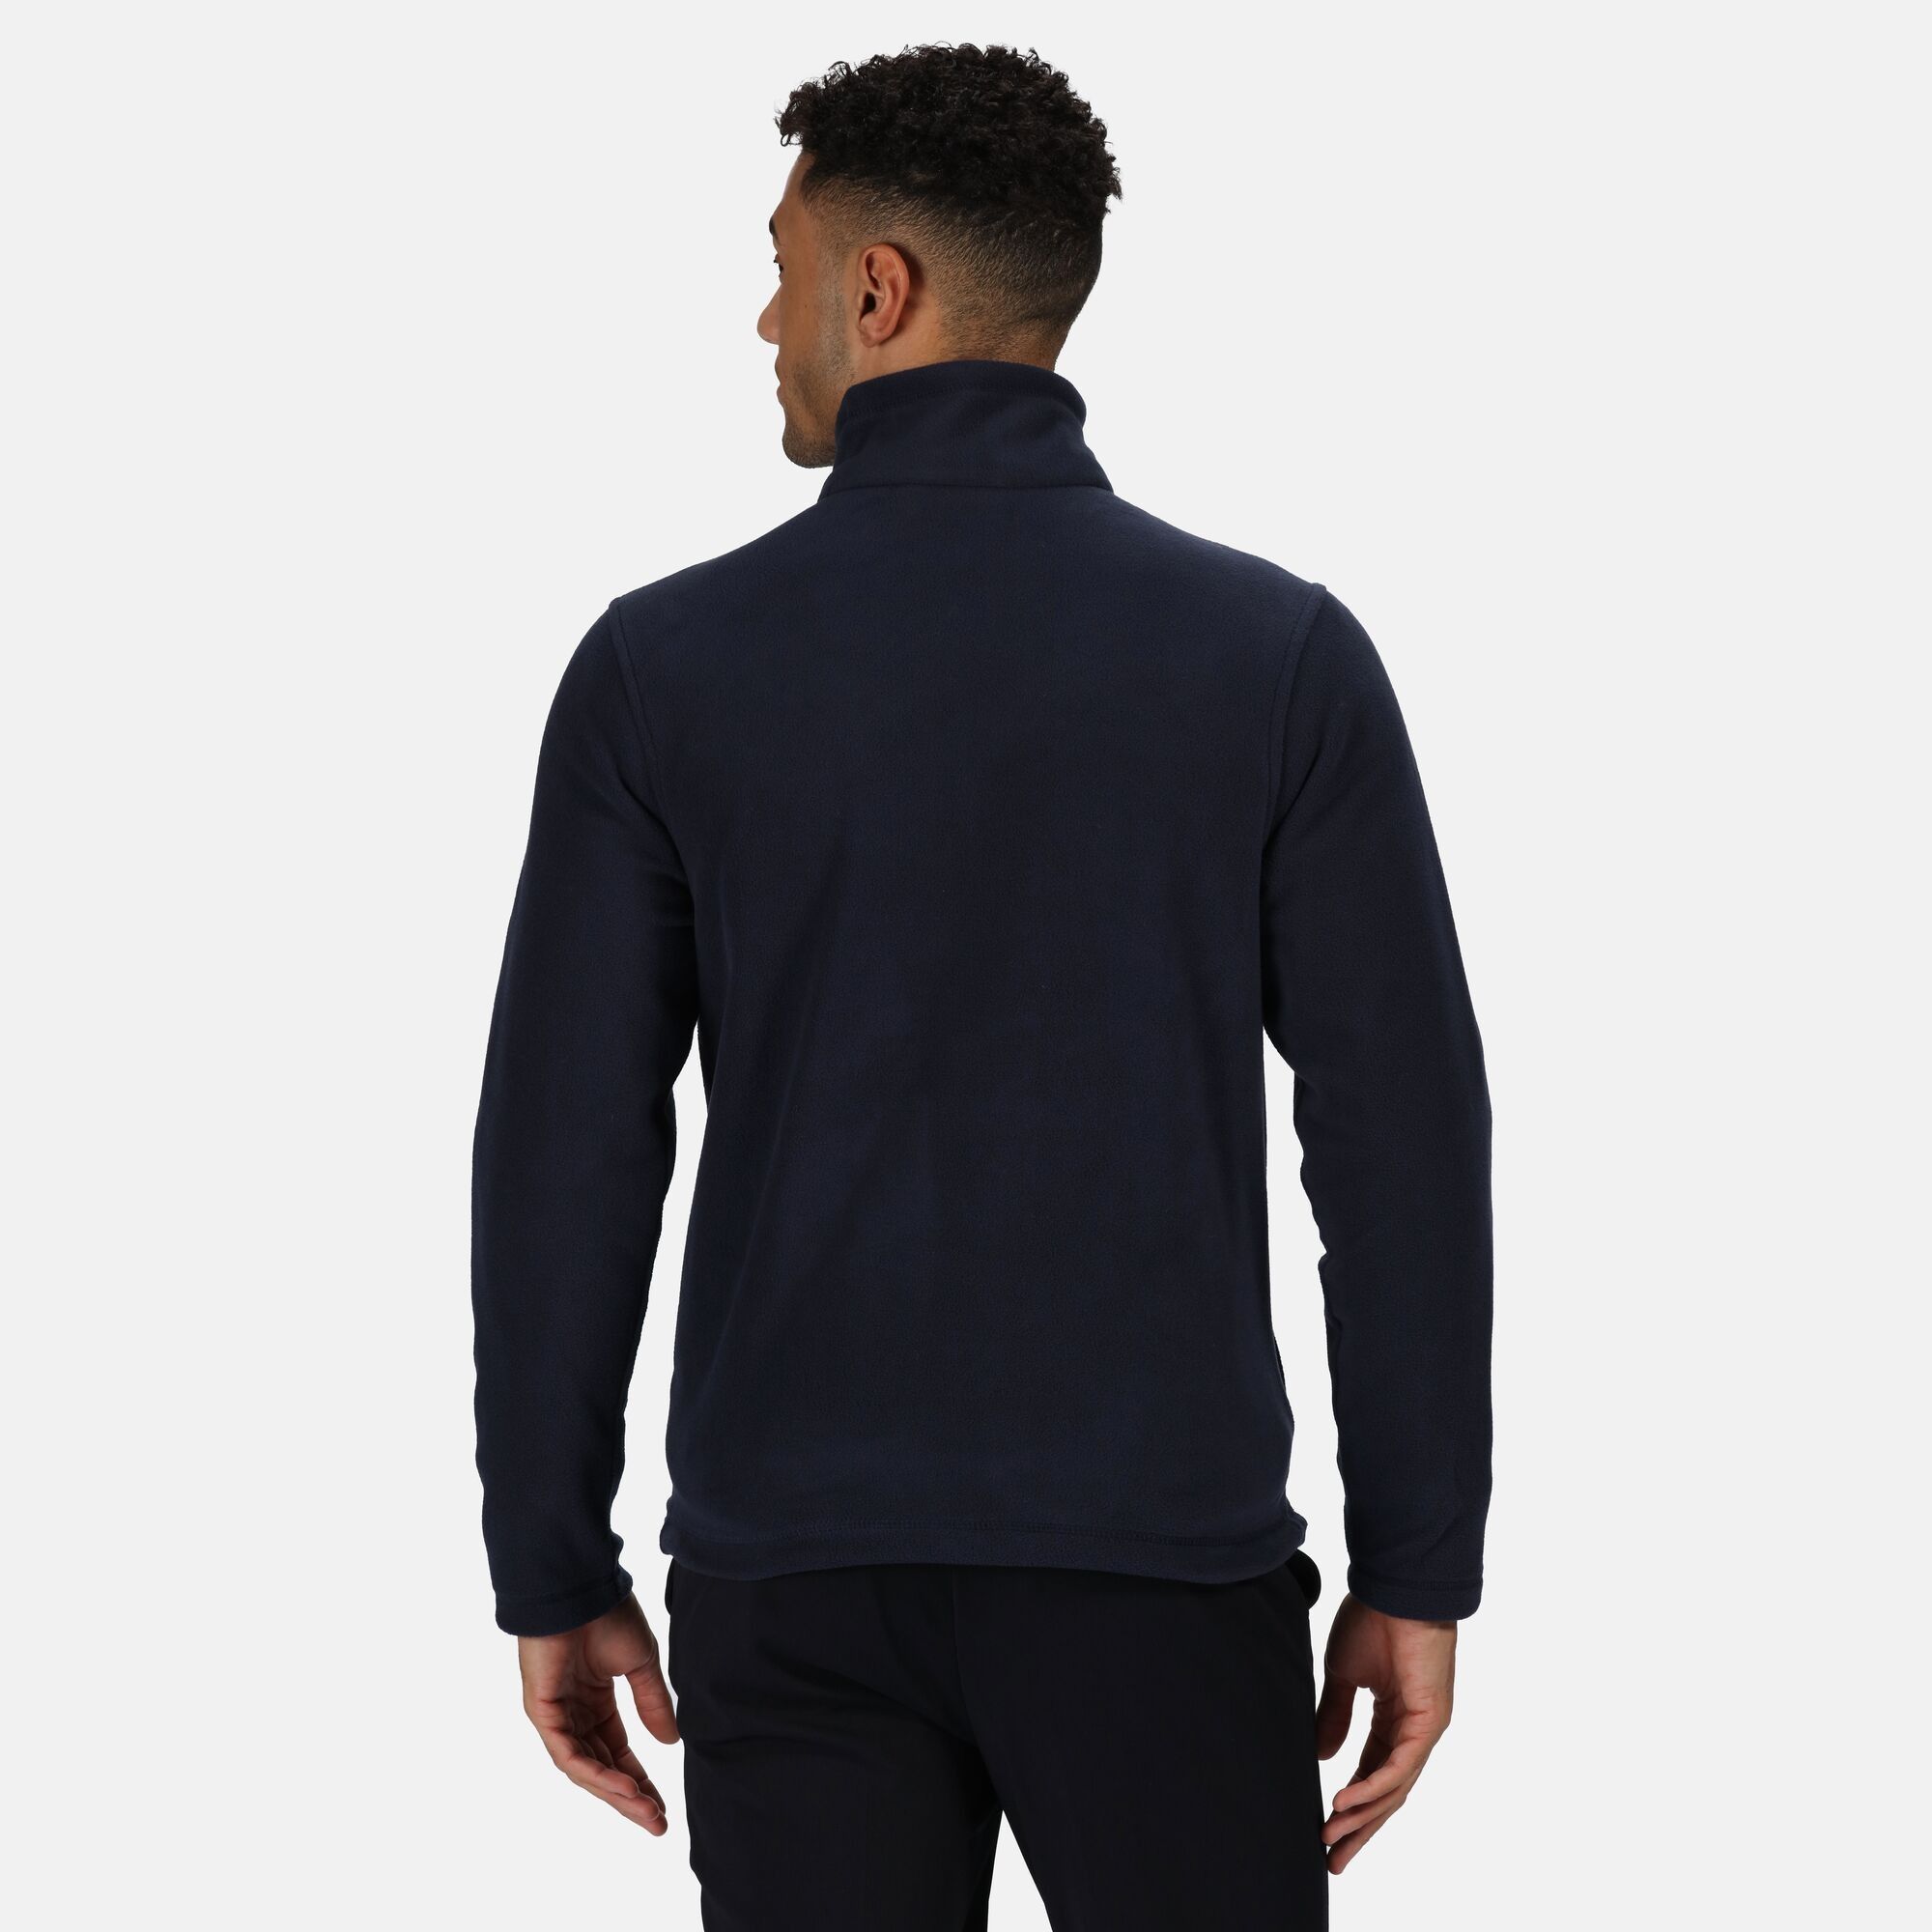 210 series microfleece. Layer lite fabric technology. Fleece cuffs. Adjustable shockcord hem. 2 zippered lower pockets. 2XL (46-48: Chest To Fit (ins)). 3XL (49-51: Chest To Fit (ins)). 4XL (52-54: Chest To Fit (ins)). L (41-42: Chest To Fit (ins)). M (39-40: Chest To Fit (ins)). S (37-38: Chest To Fit (ins)). XL (43-44: Chest To Fit (ins)). 100% Polyester.